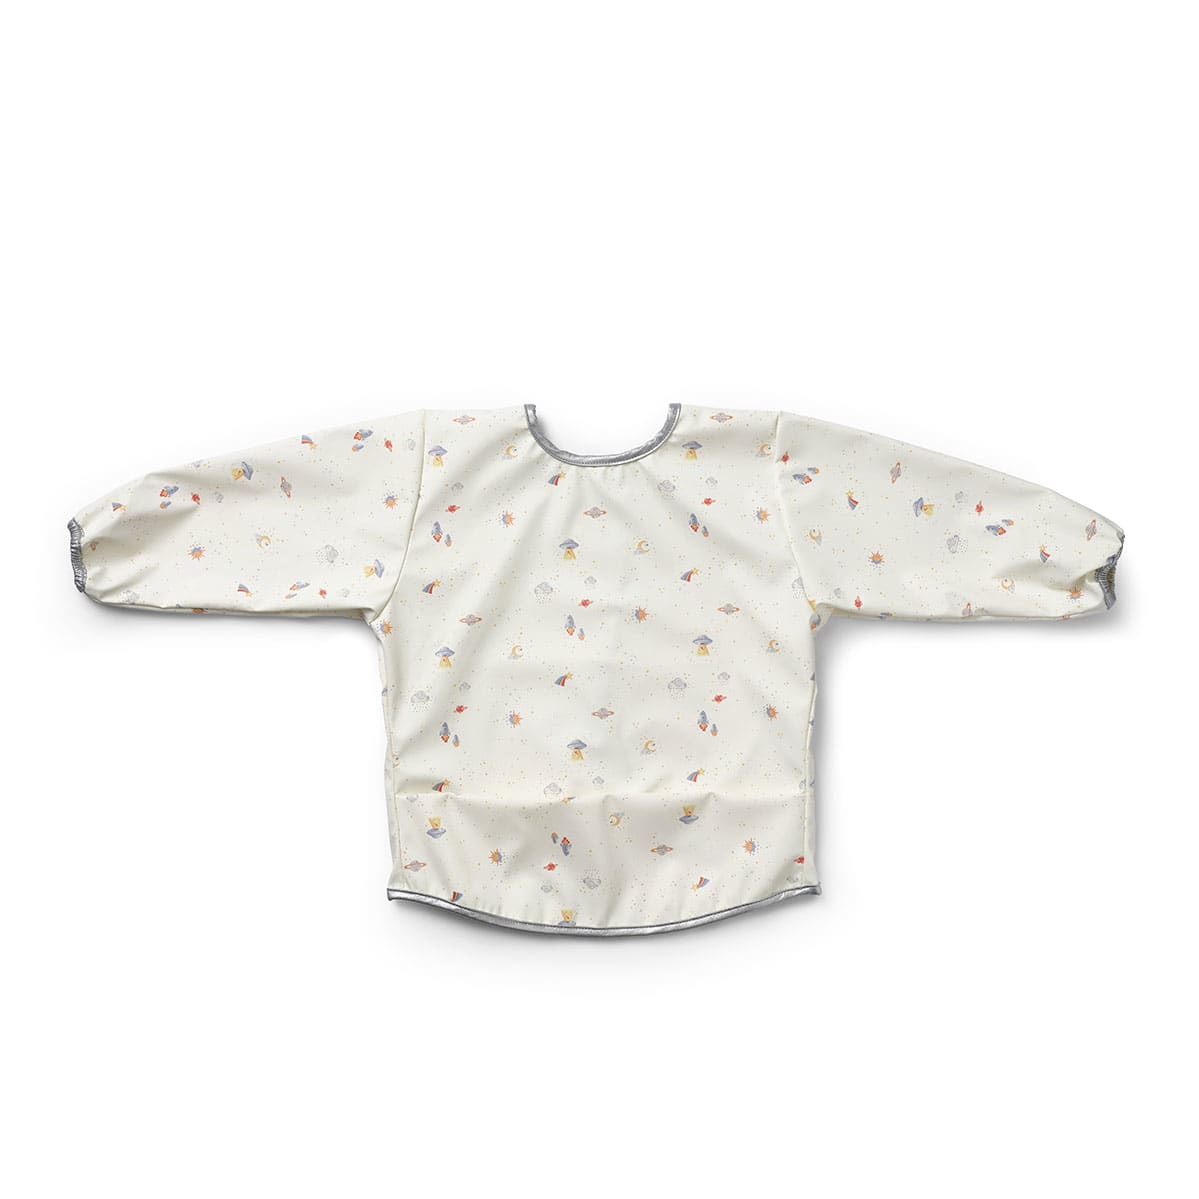 Elodie Details -Longsleeved Baby Bib -Forest Mouse 